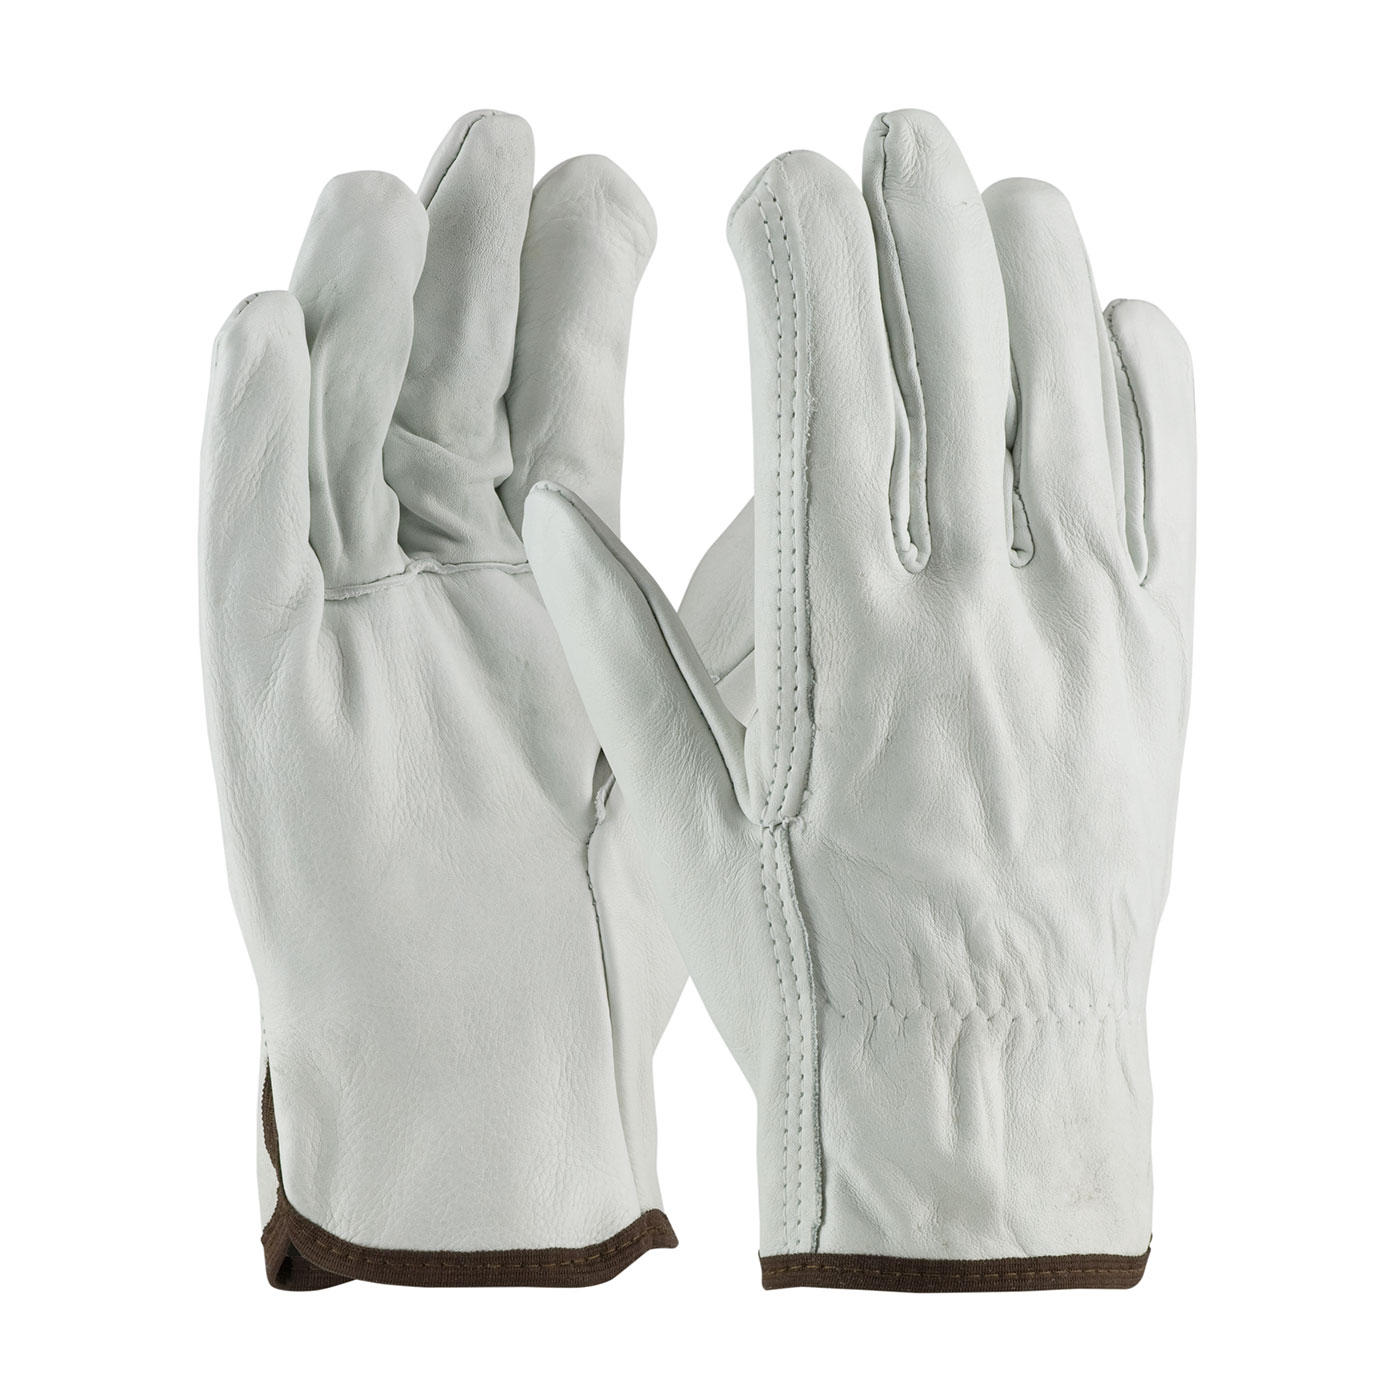 PIP 68-101/XL Superior Grade Top Grain Cowhide Leather Drivers Glove - Straight Thumb - X-Large PID-68 101 XL